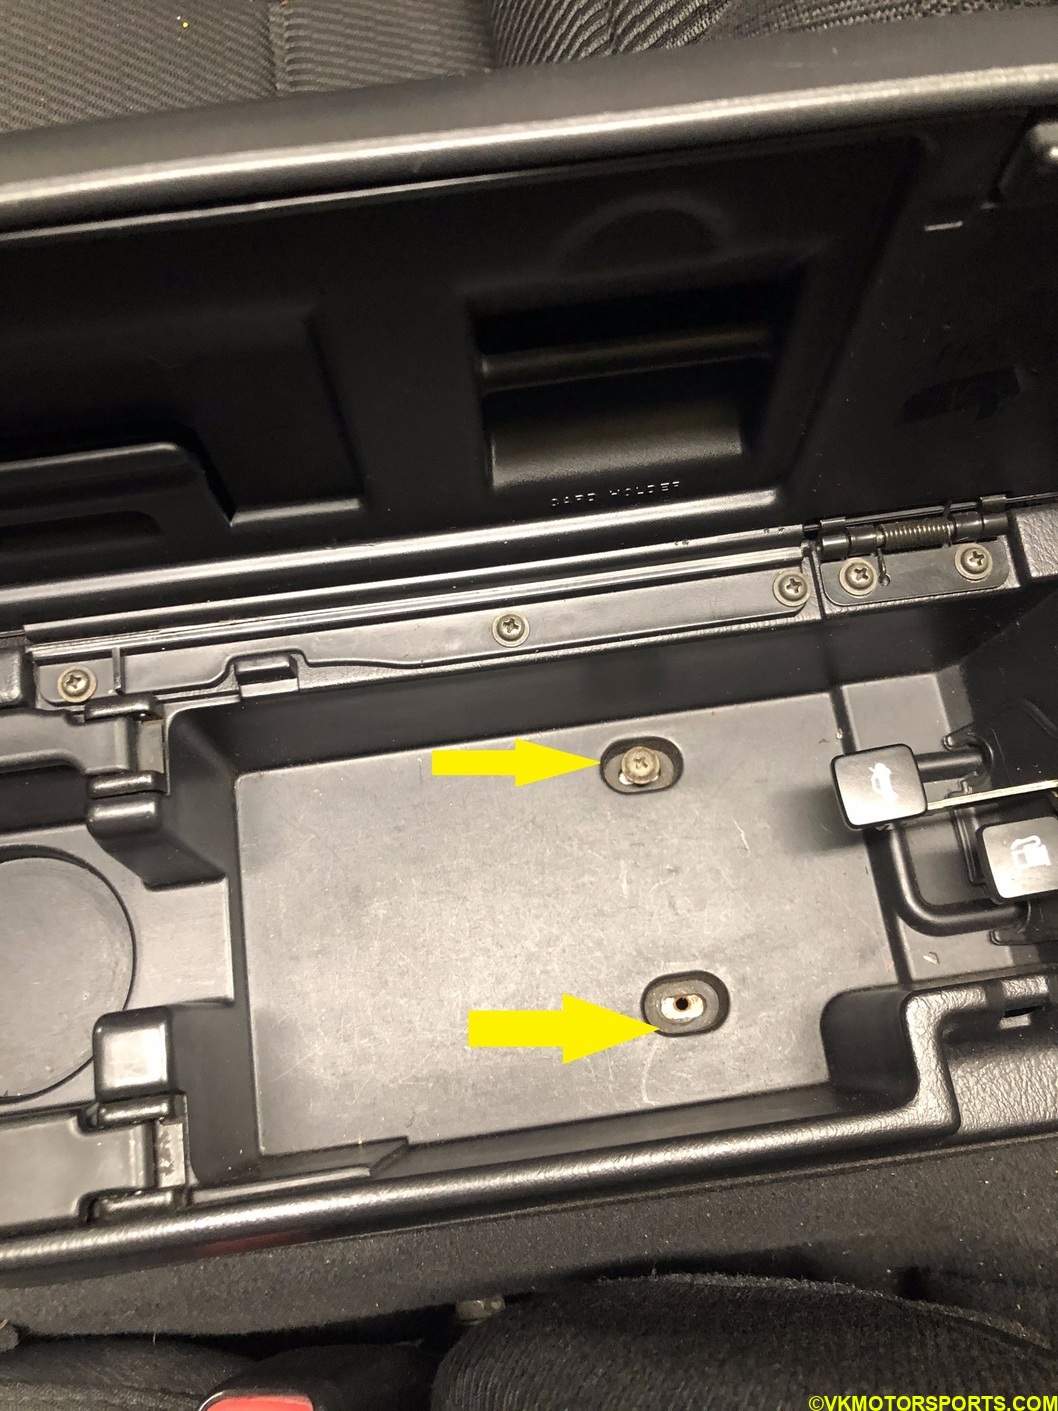 Figure 2a. Two screws in storage compartment